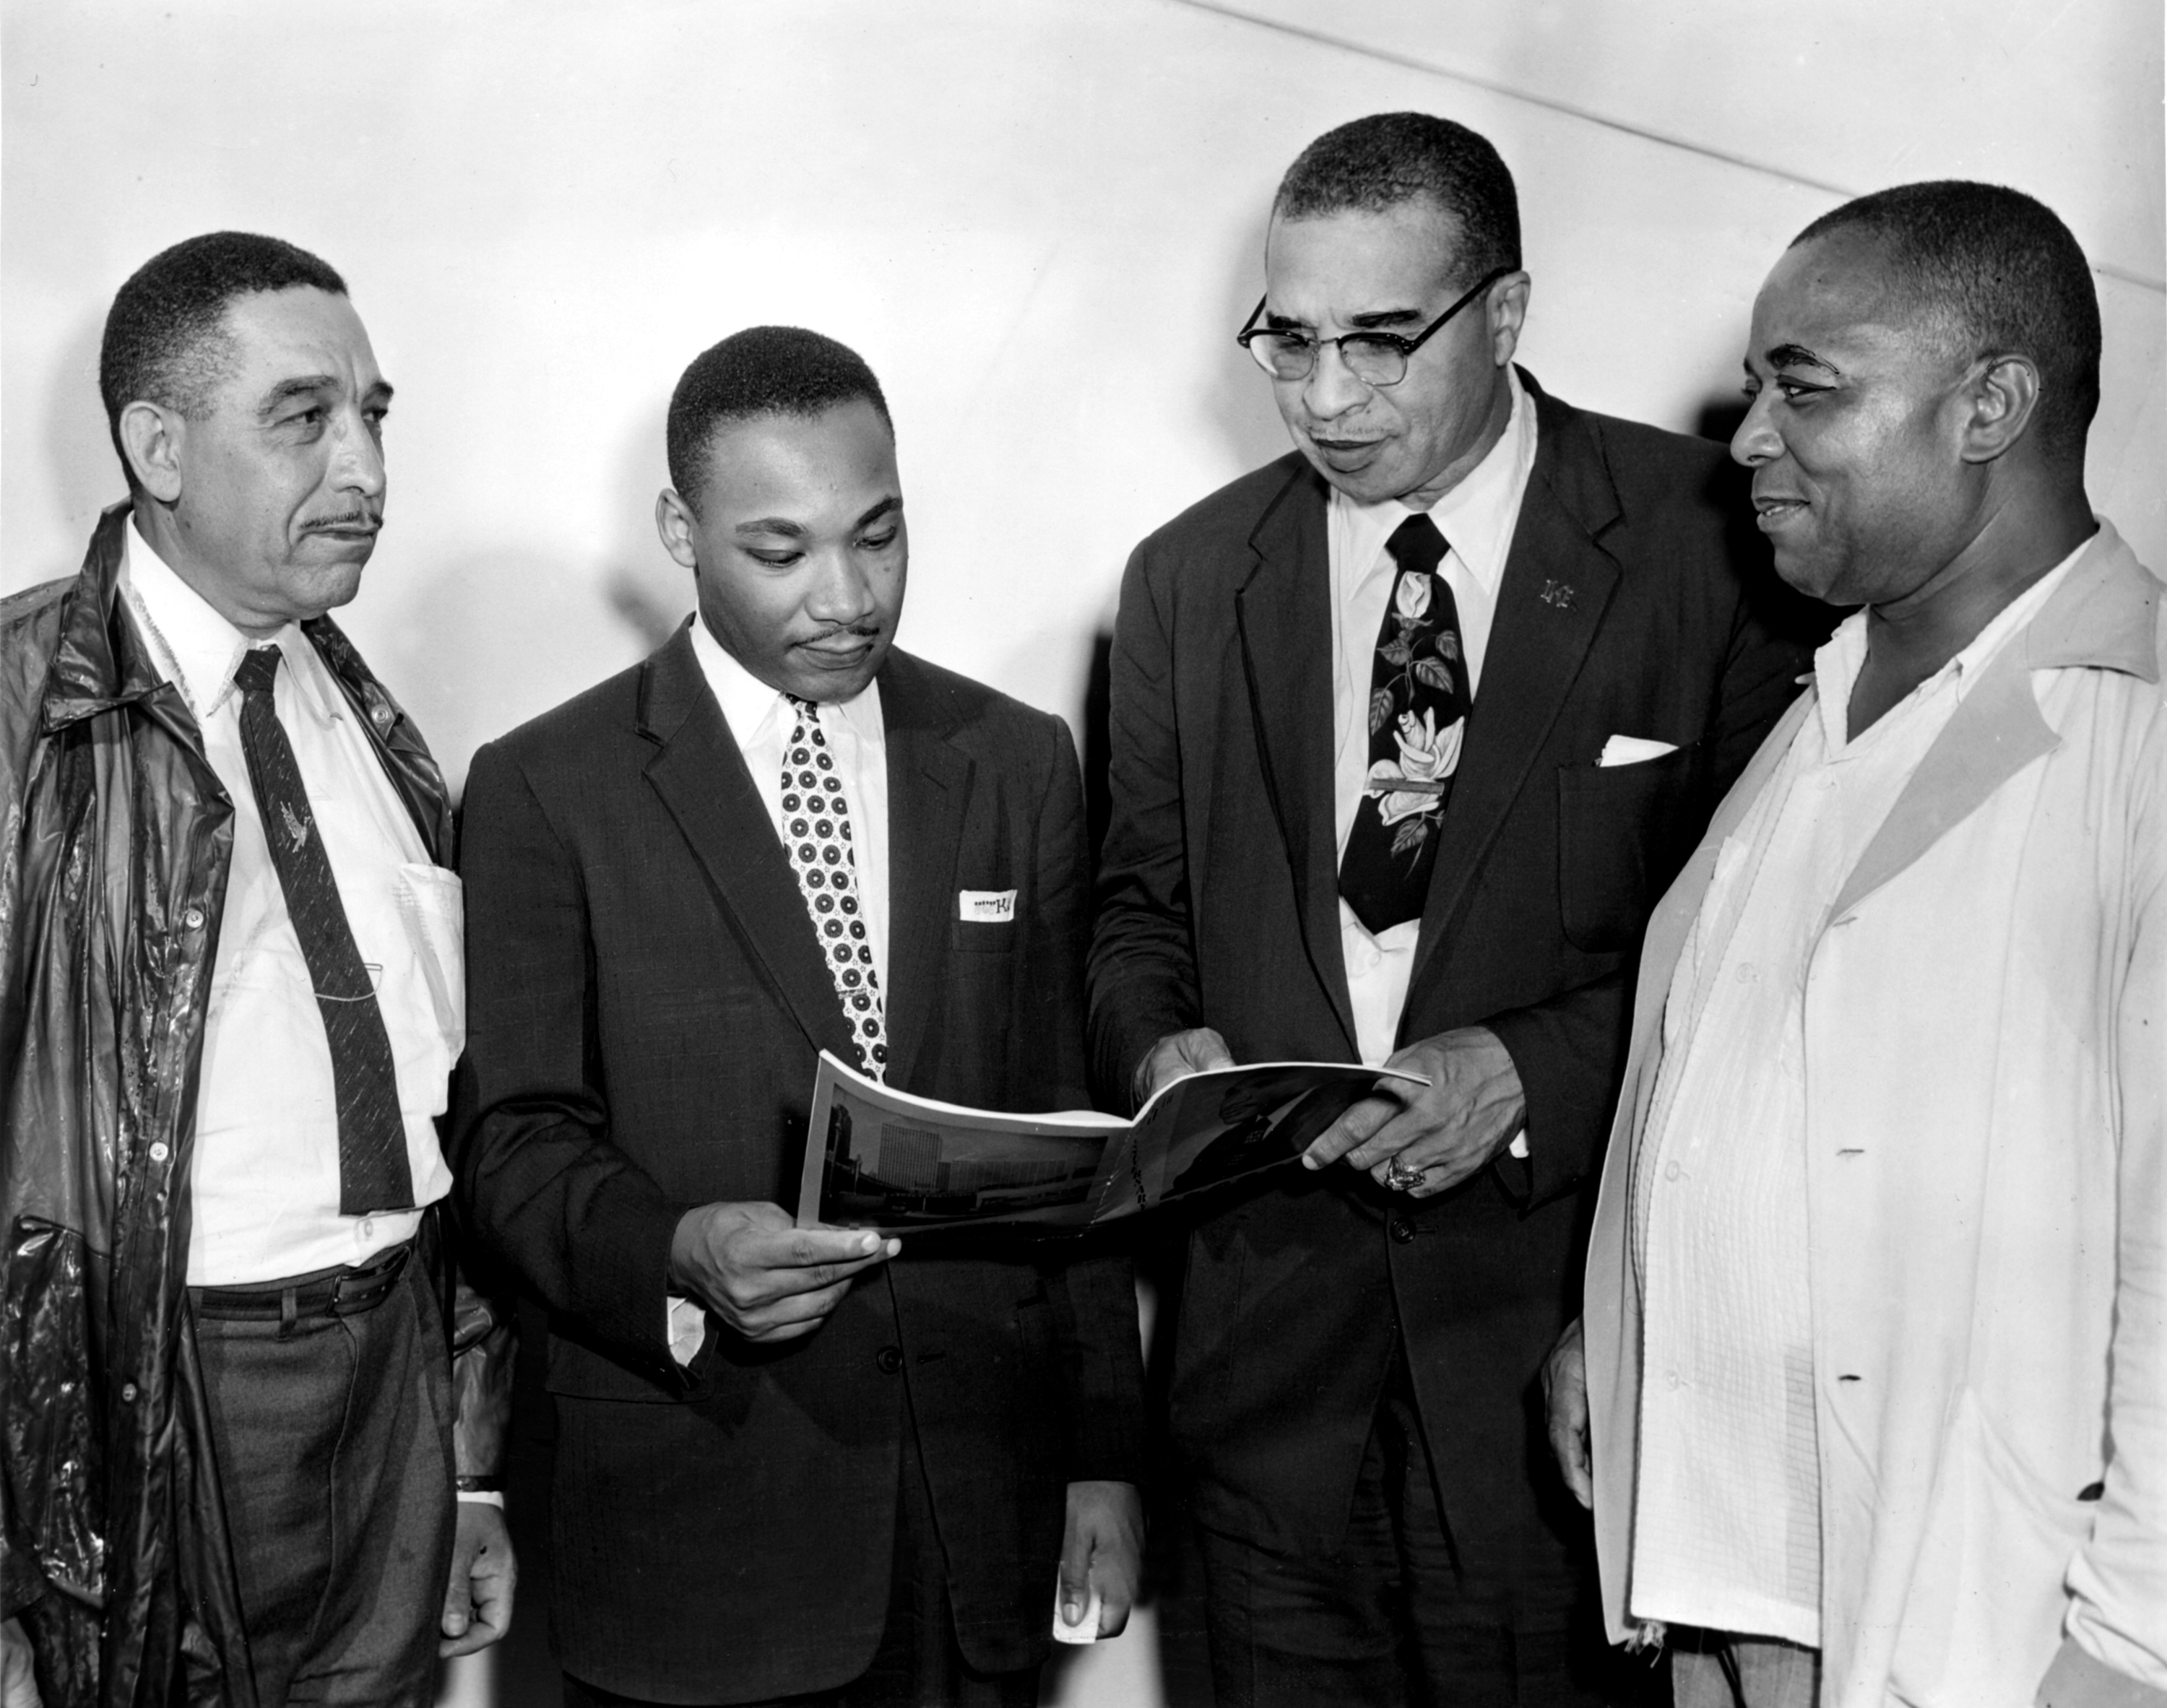 Martin Luther King Jr., Russel Small, Rev. Theodore S. Boone, and Walter Perry at Emancipation Day Celebrations in 1956